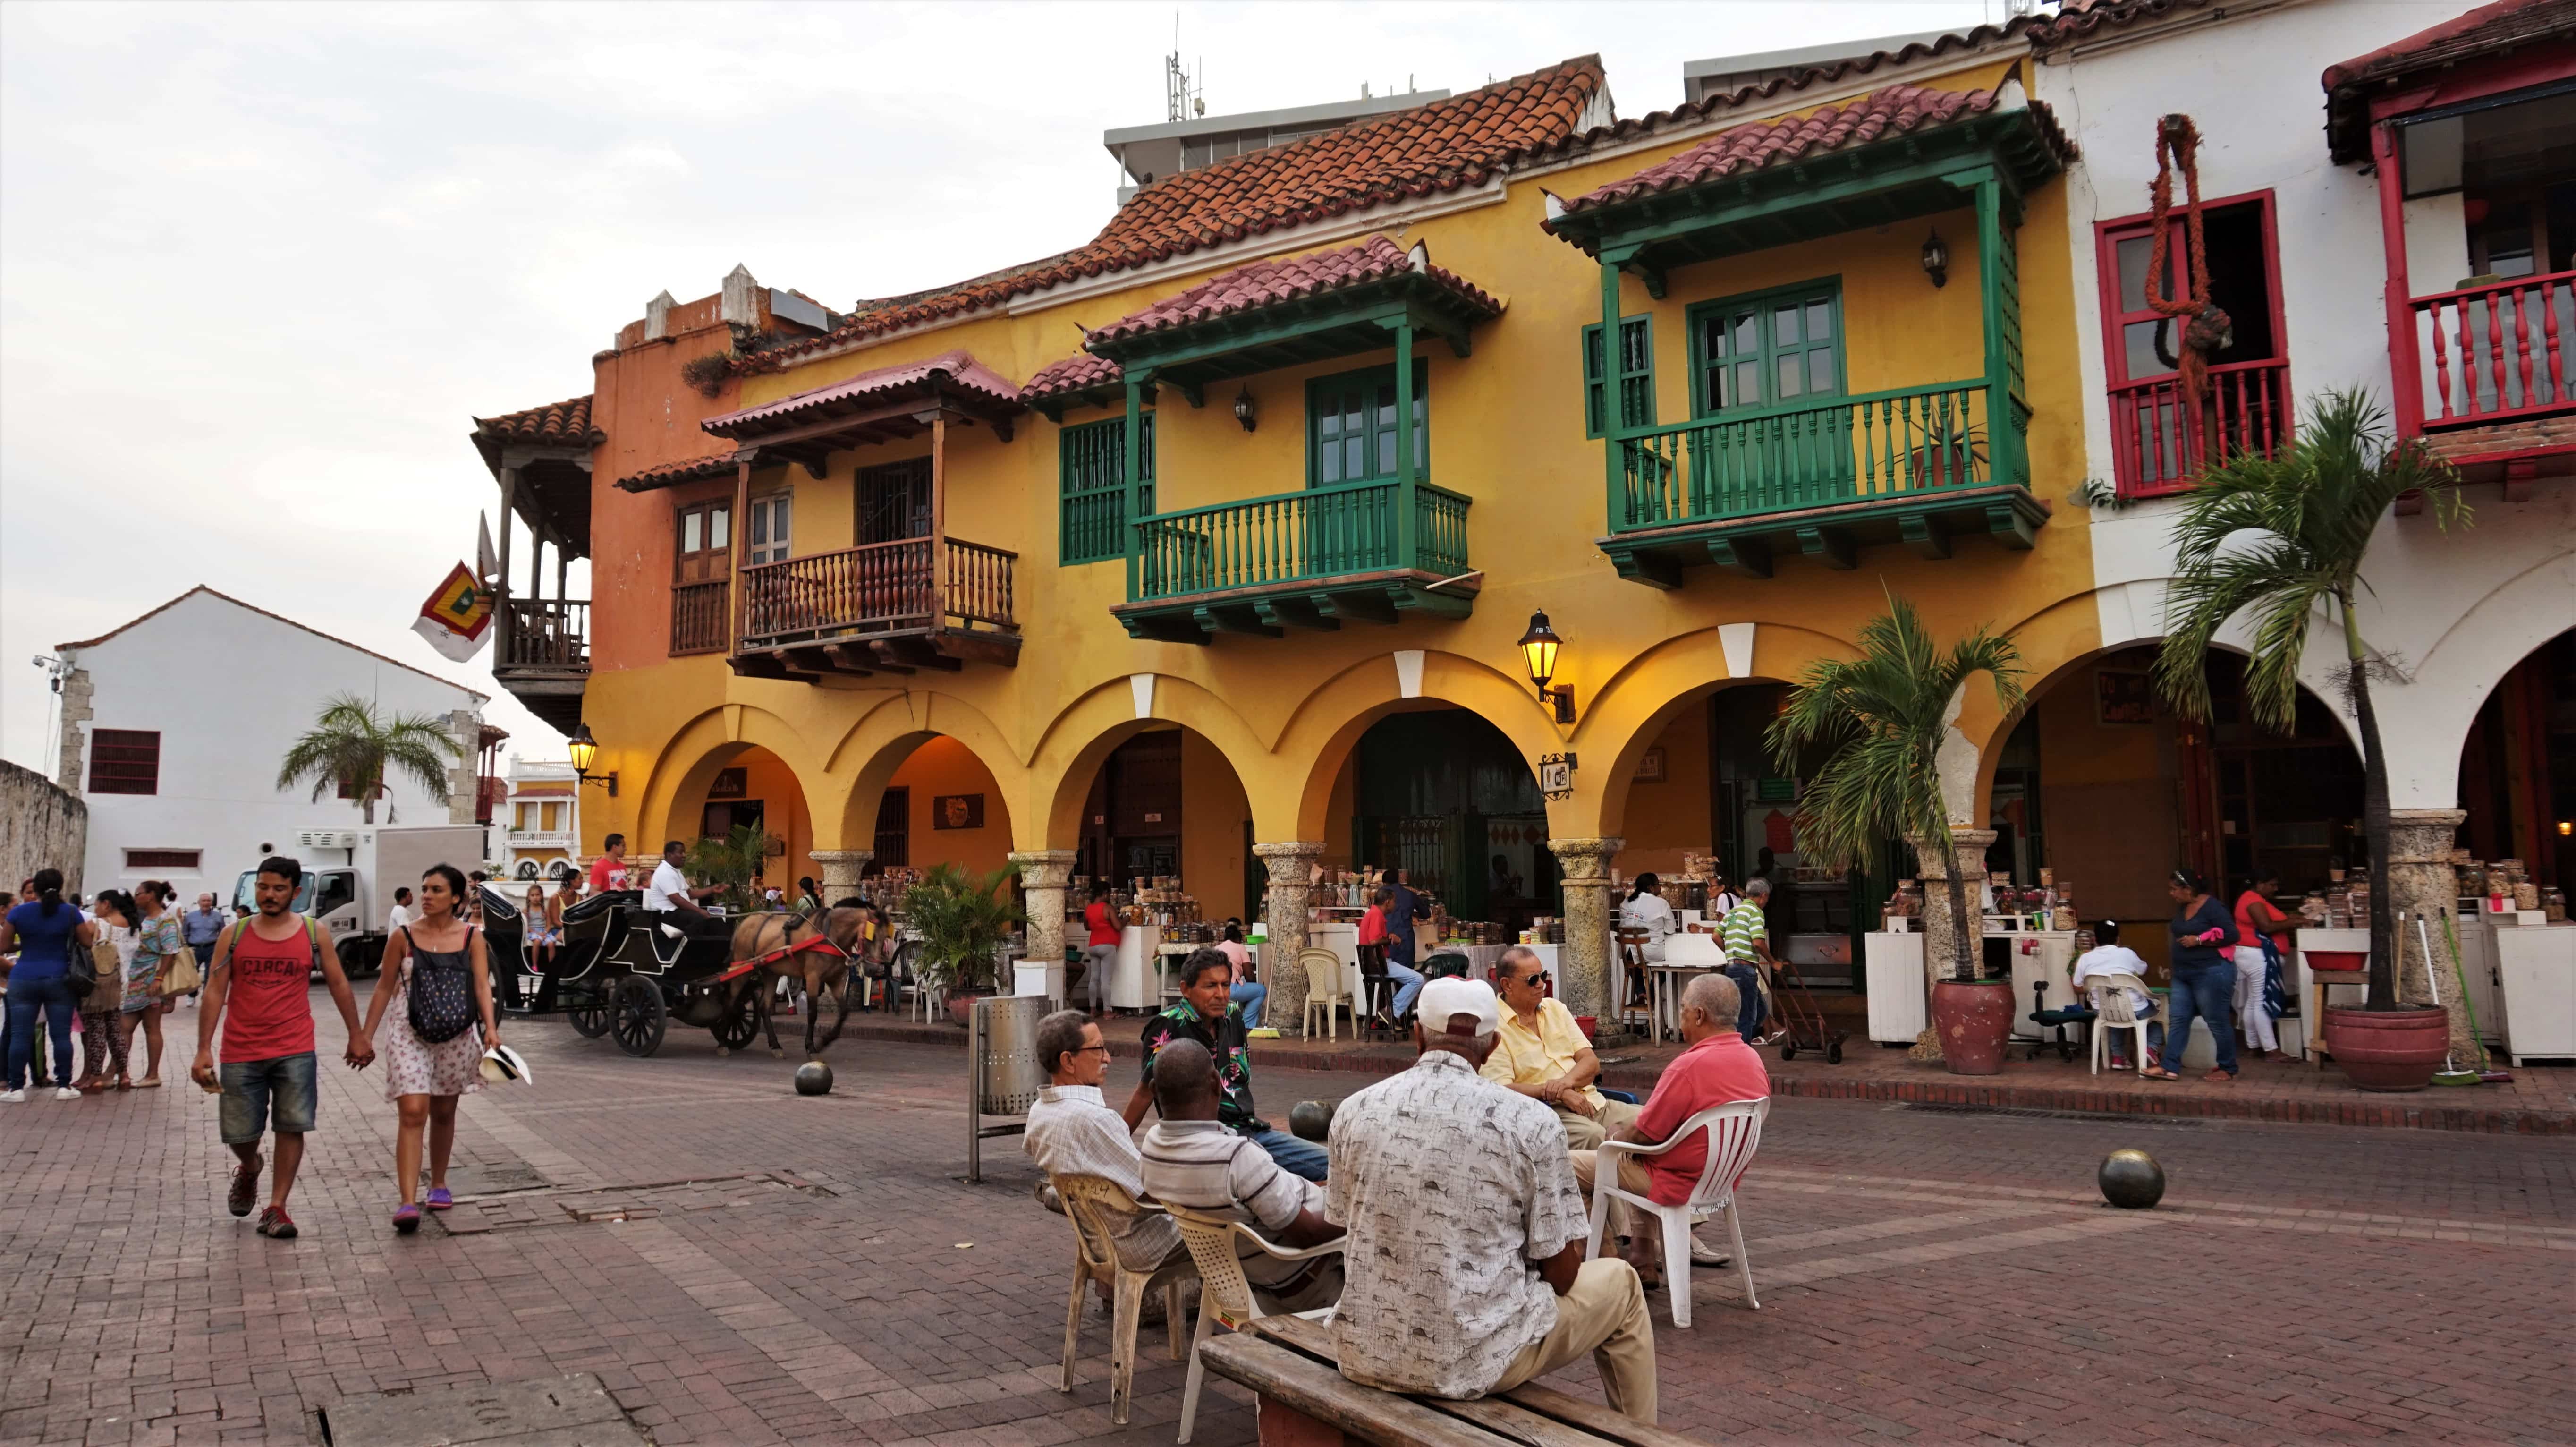 Street life in Cartagena, Colombia